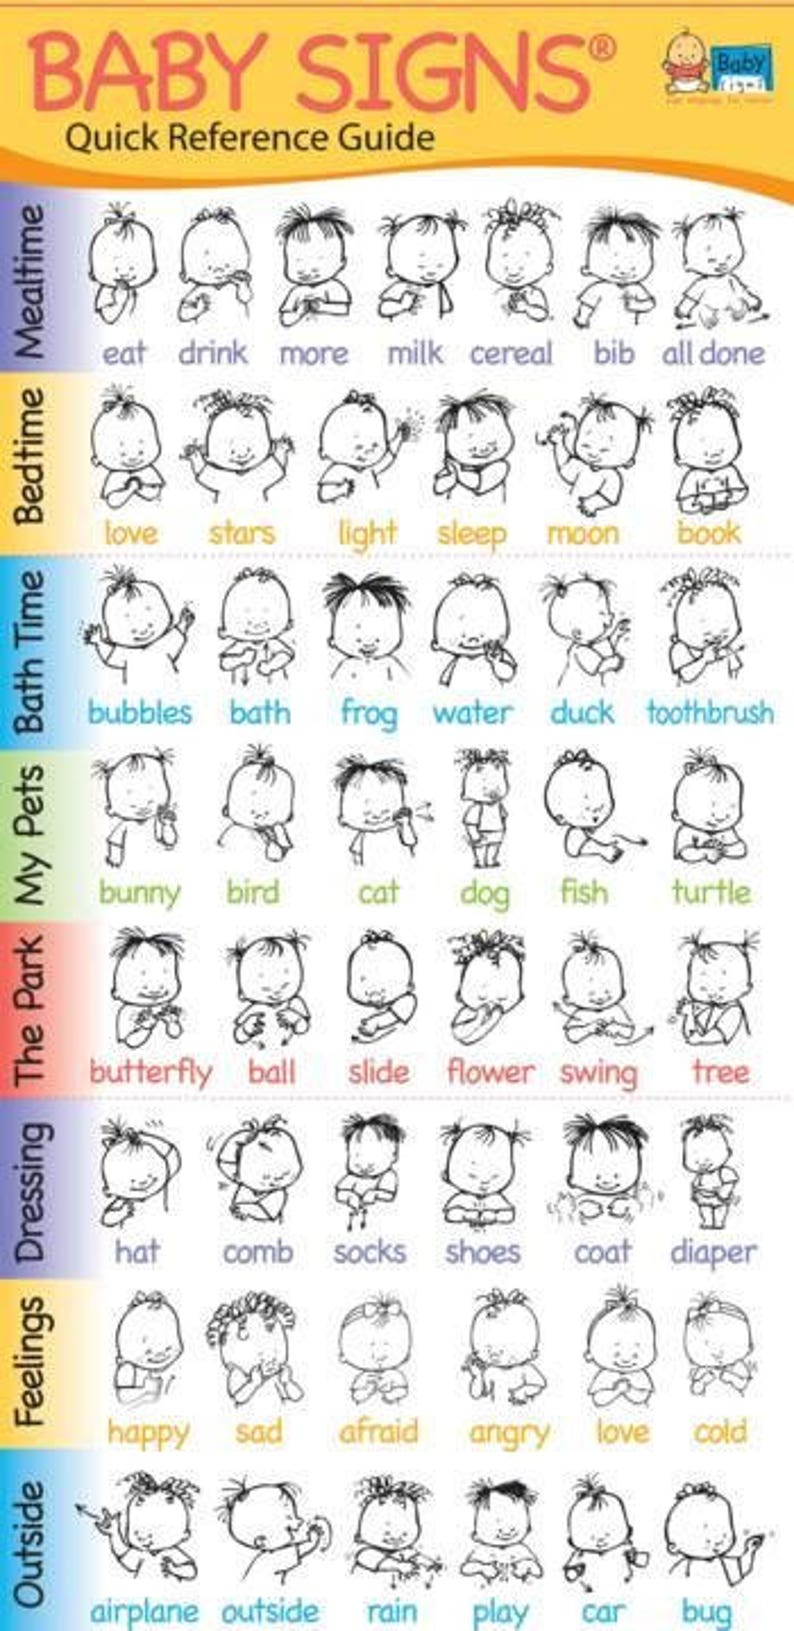 Baby Signs Quick Reference Guide: English Edition immagine 2